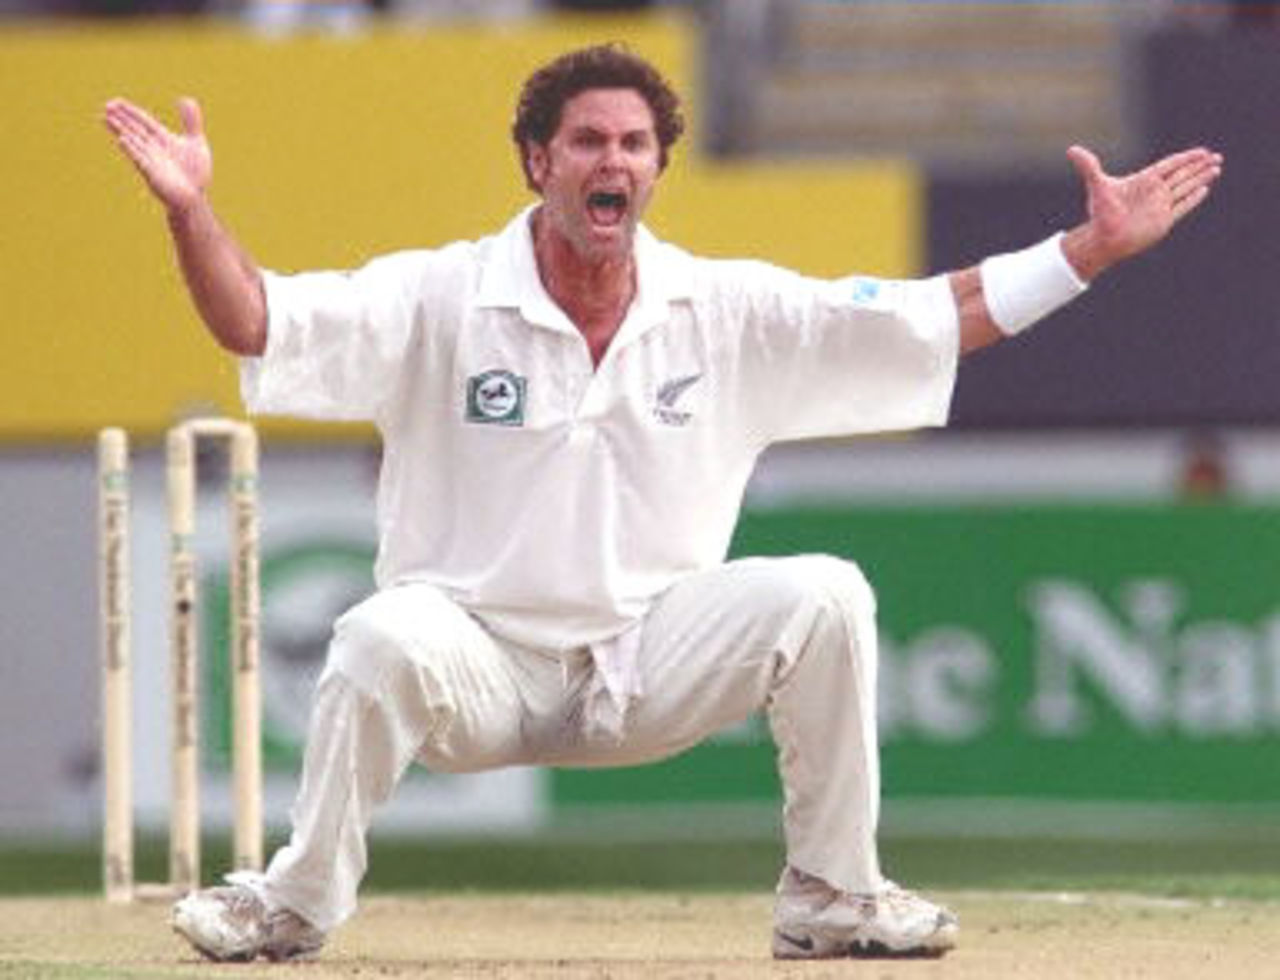 New Zealand fast bowler Chris Cairns celebrates bowling Australian opening batsman Michael Slater for five on the first day of the first Test Match at Eden Park in Auckland 11 March 2000. At lunch Australia is 97-3 with Mark and Steve Waugh the not out batsmen.